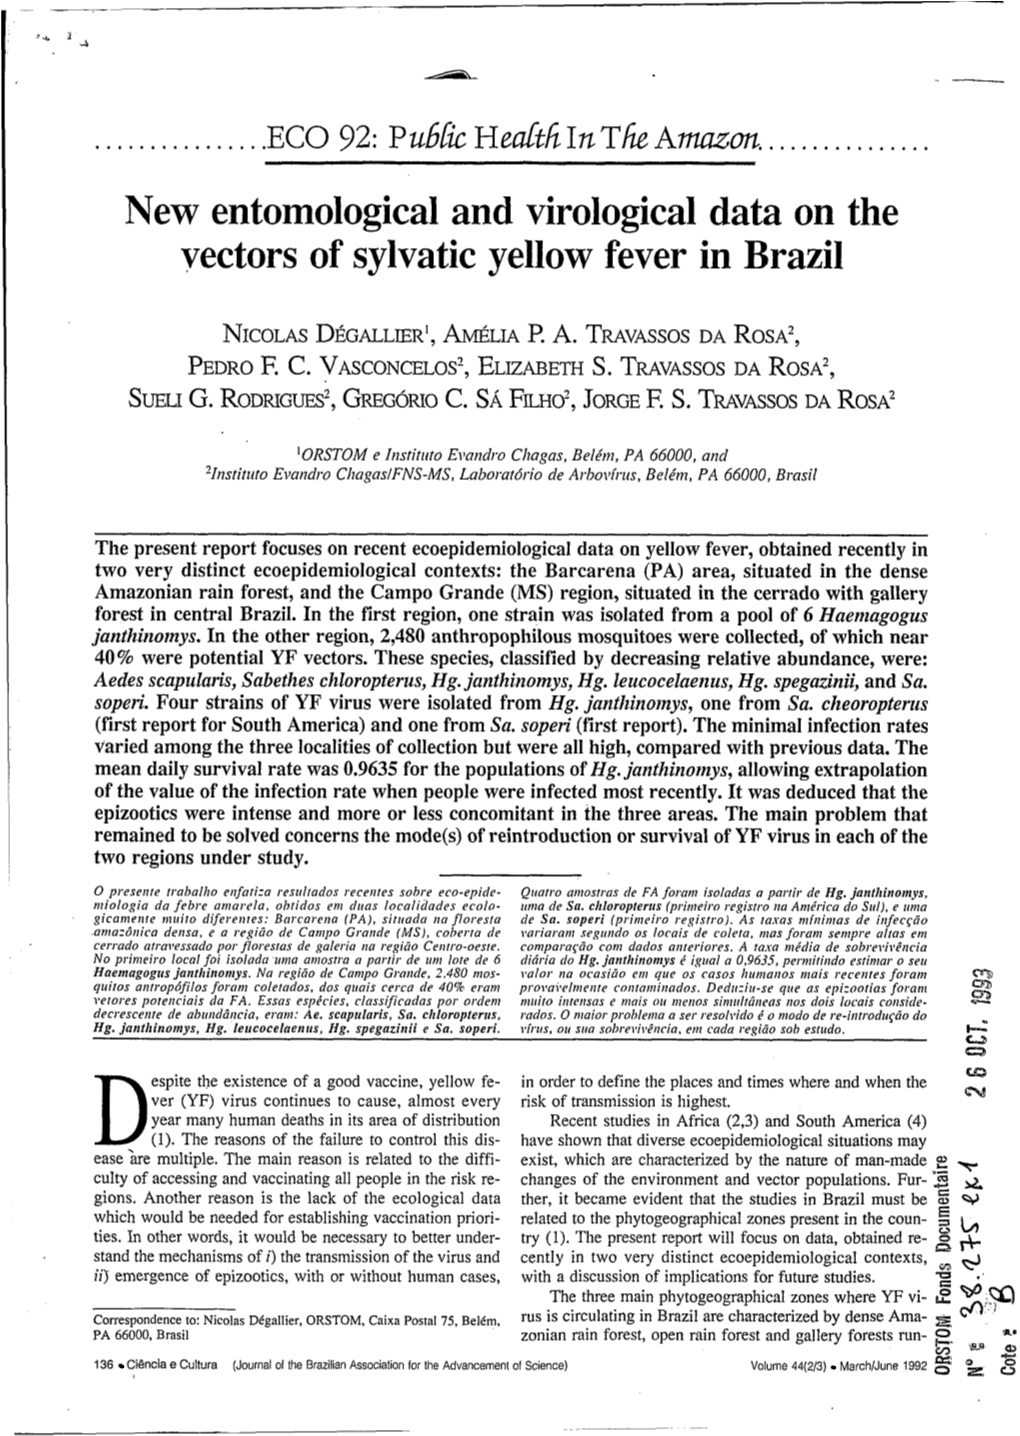 New Entomological and Virological Data on the Vectors of Sylvatic Yellow Fever in Brazil